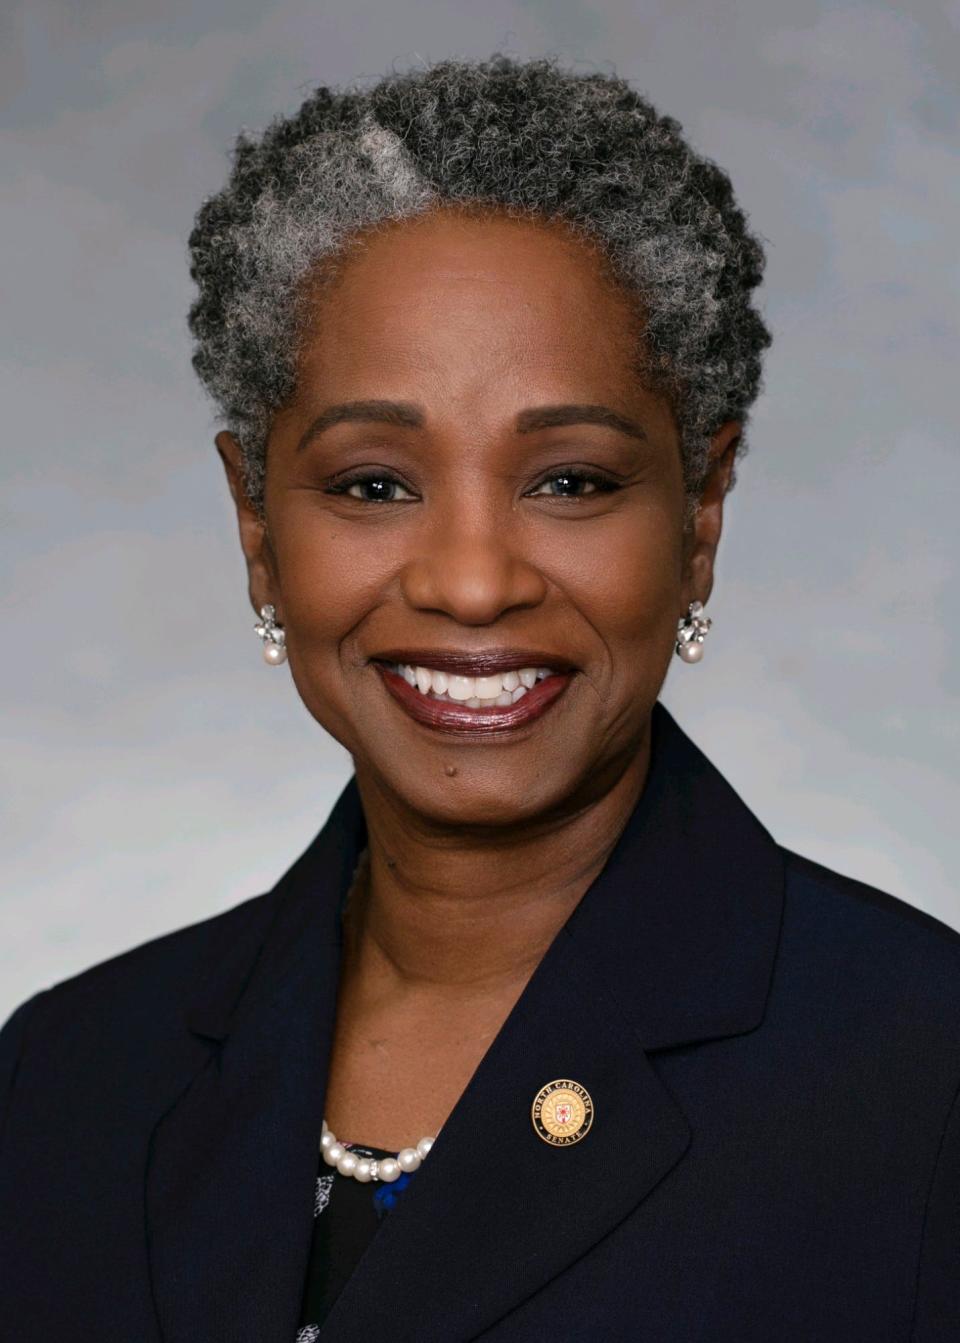 NC State Sen. Val Applewhite, District 19, Cumberland County